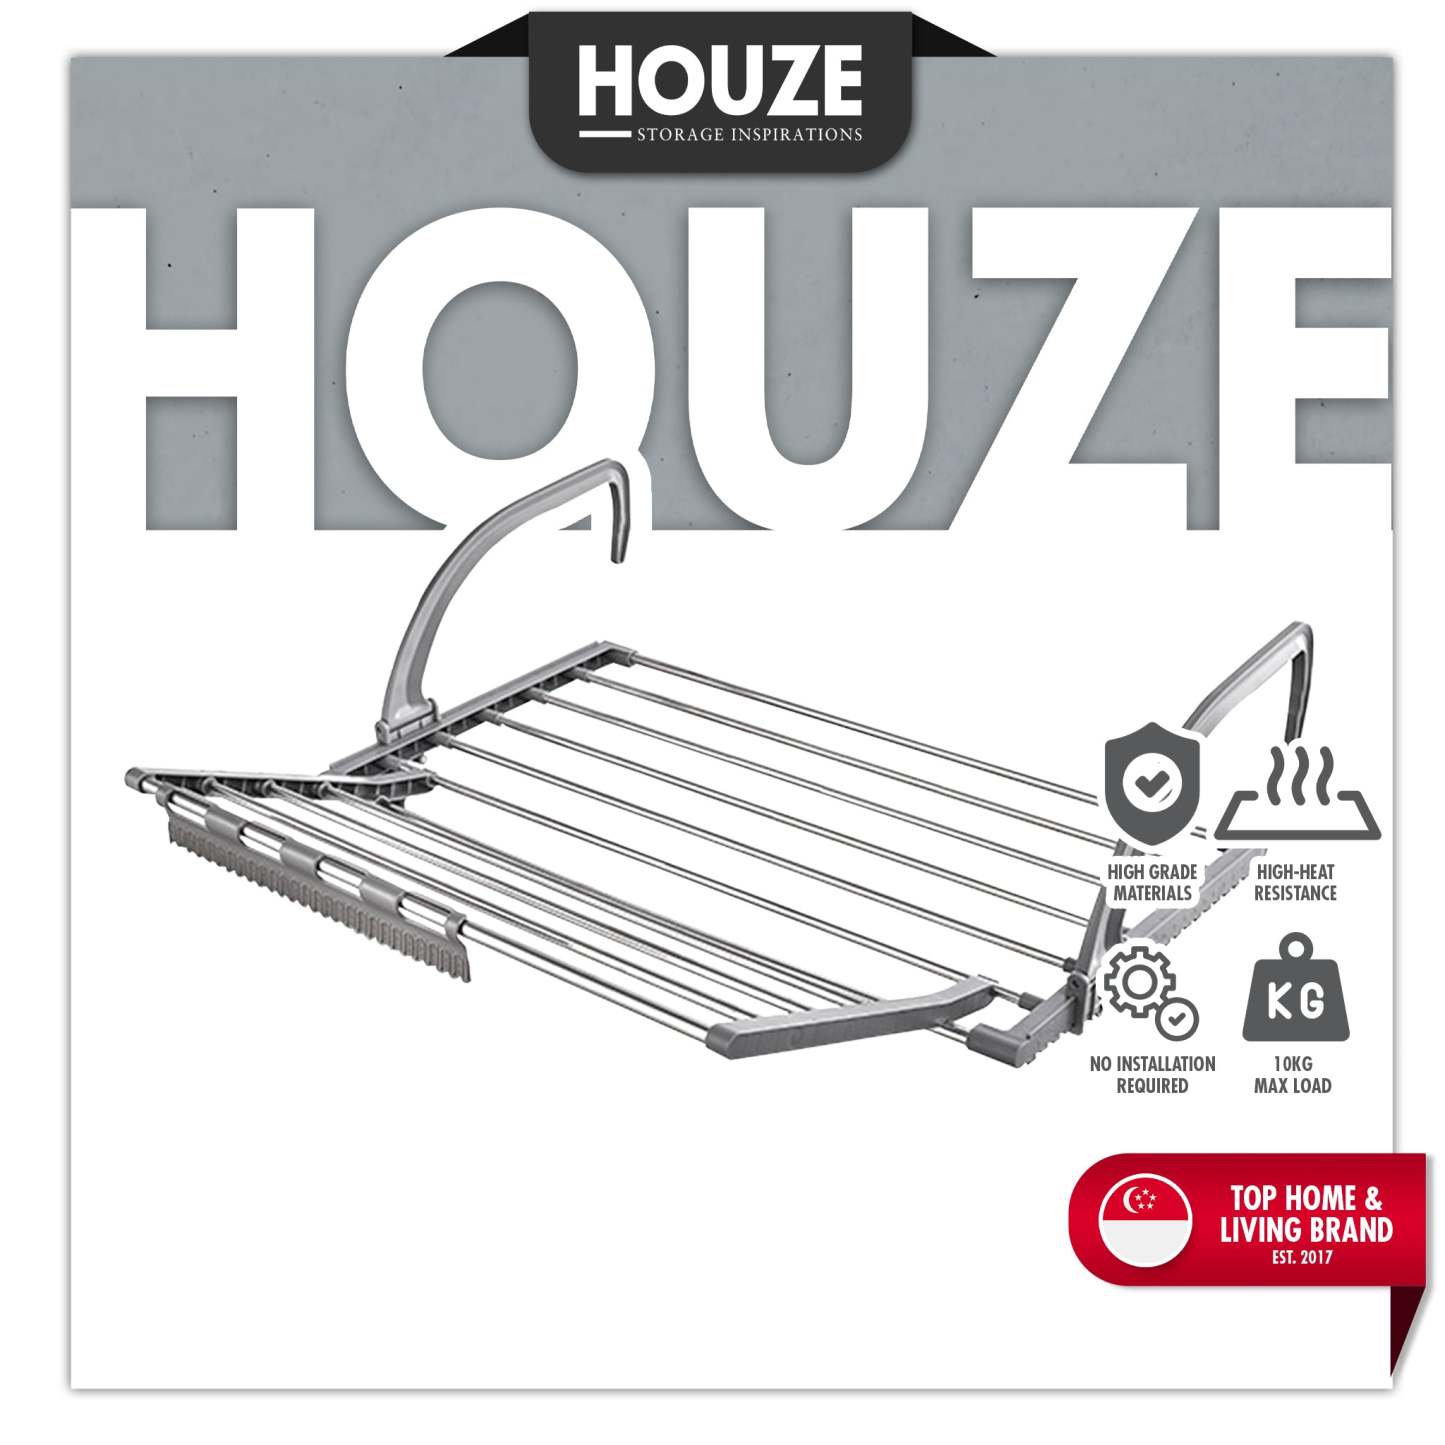 HOUZE - Extendable and Adjustable Wall Hanging Radiator Airer Large